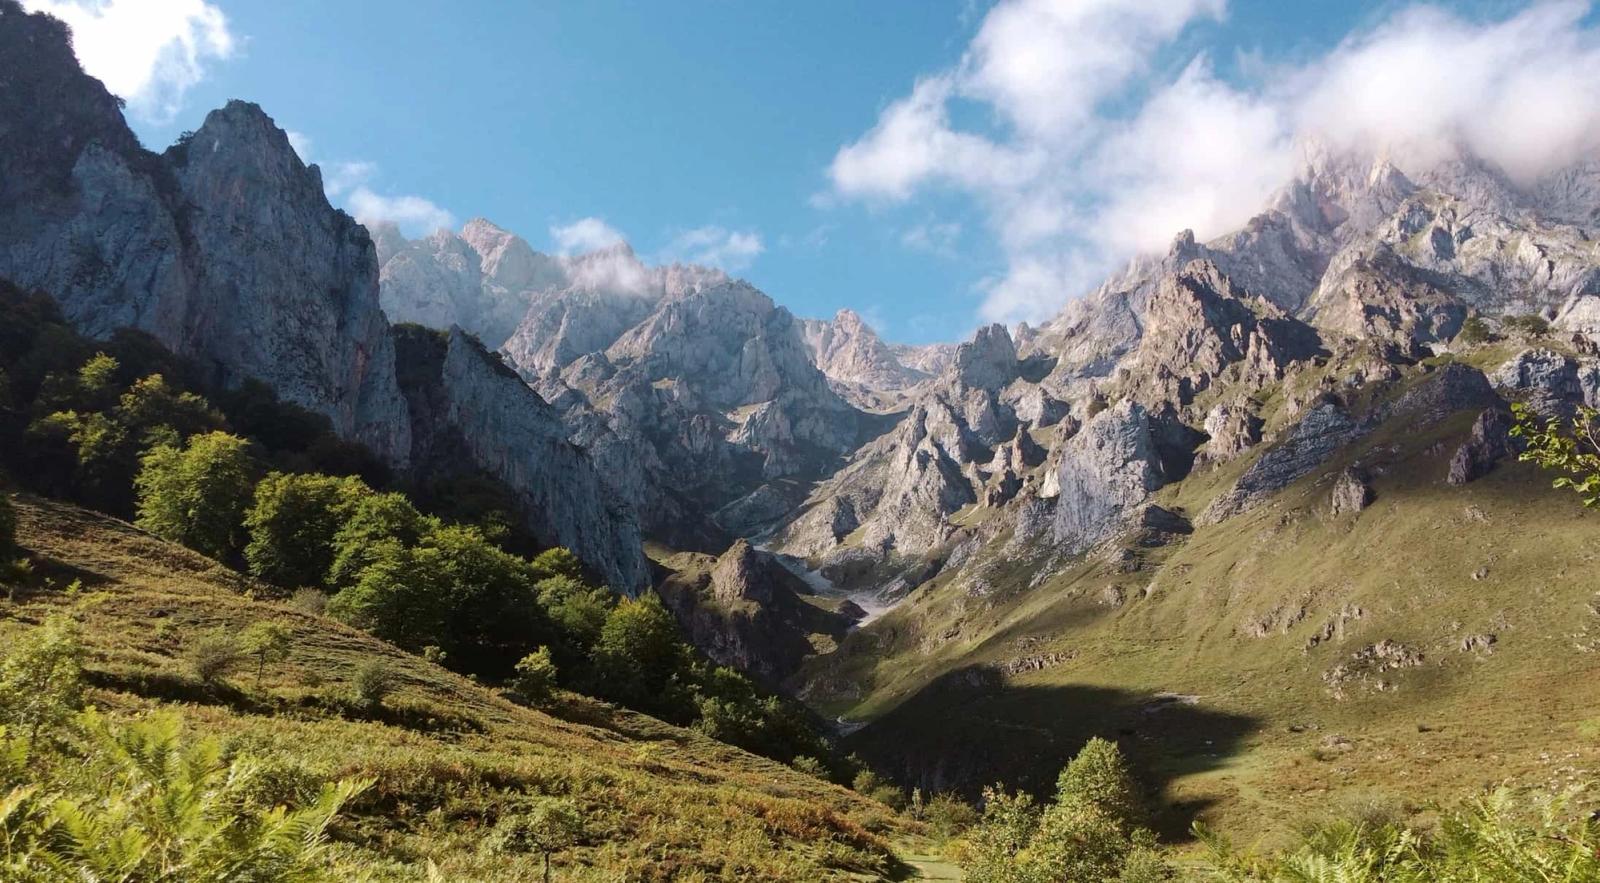 The mountains of Cantabria are a great destination for camping in Spain